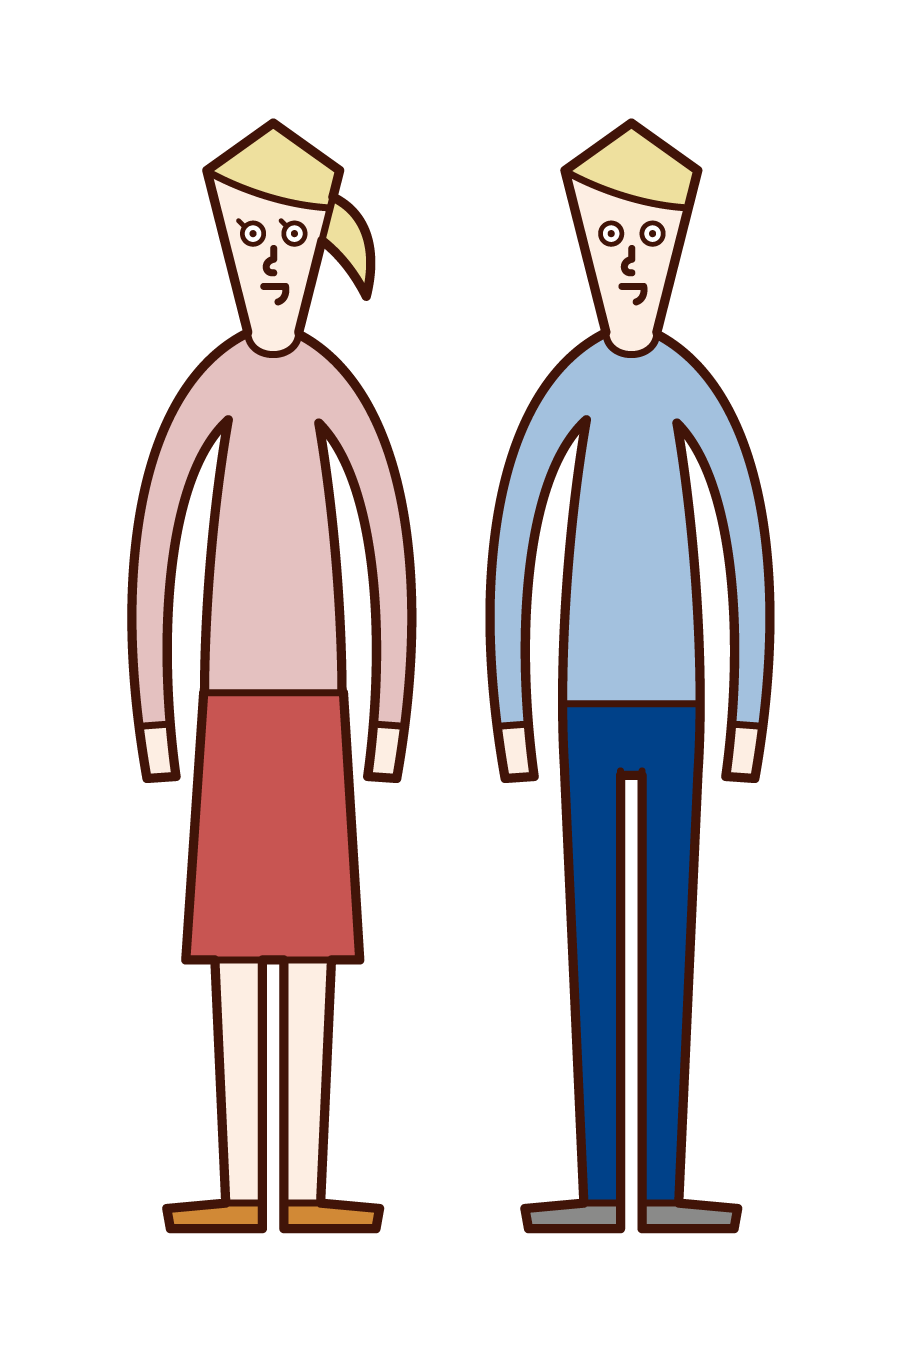 Illustration of a couple standing upright